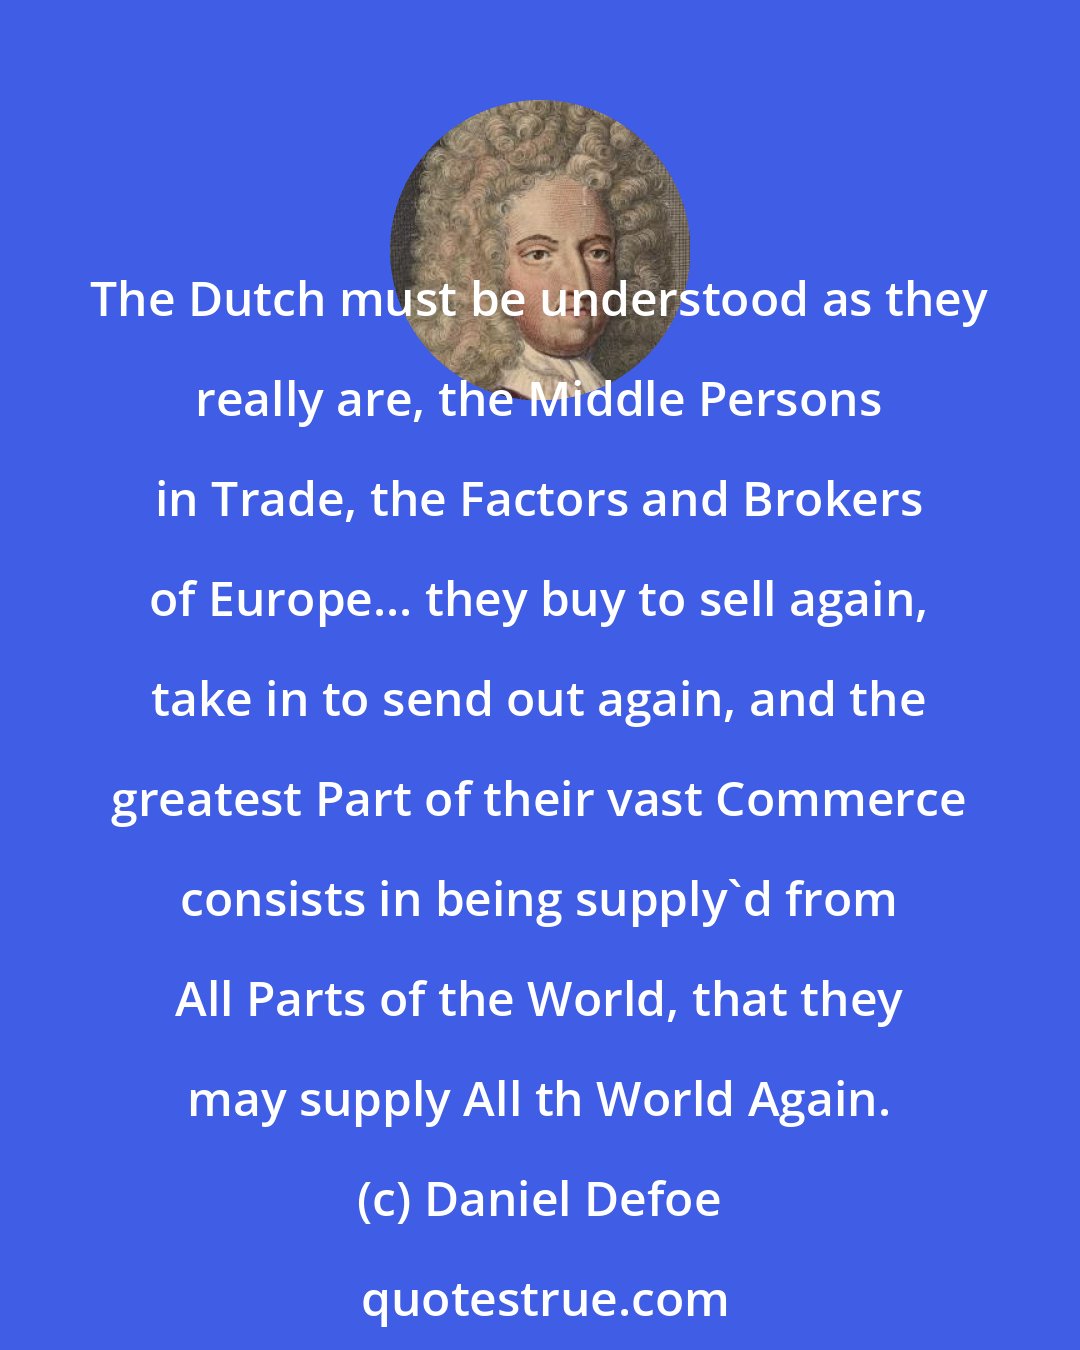 Daniel Defoe: The Dutch must be understood as they really are, the Middle Persons in Trade, the Factors and Brokers of Europe... they buy to sell again, take in to send out again, and the greatest Part of their vast Commerce consists in being supply'd from All Parts of the World, that they may supply All th World Again.